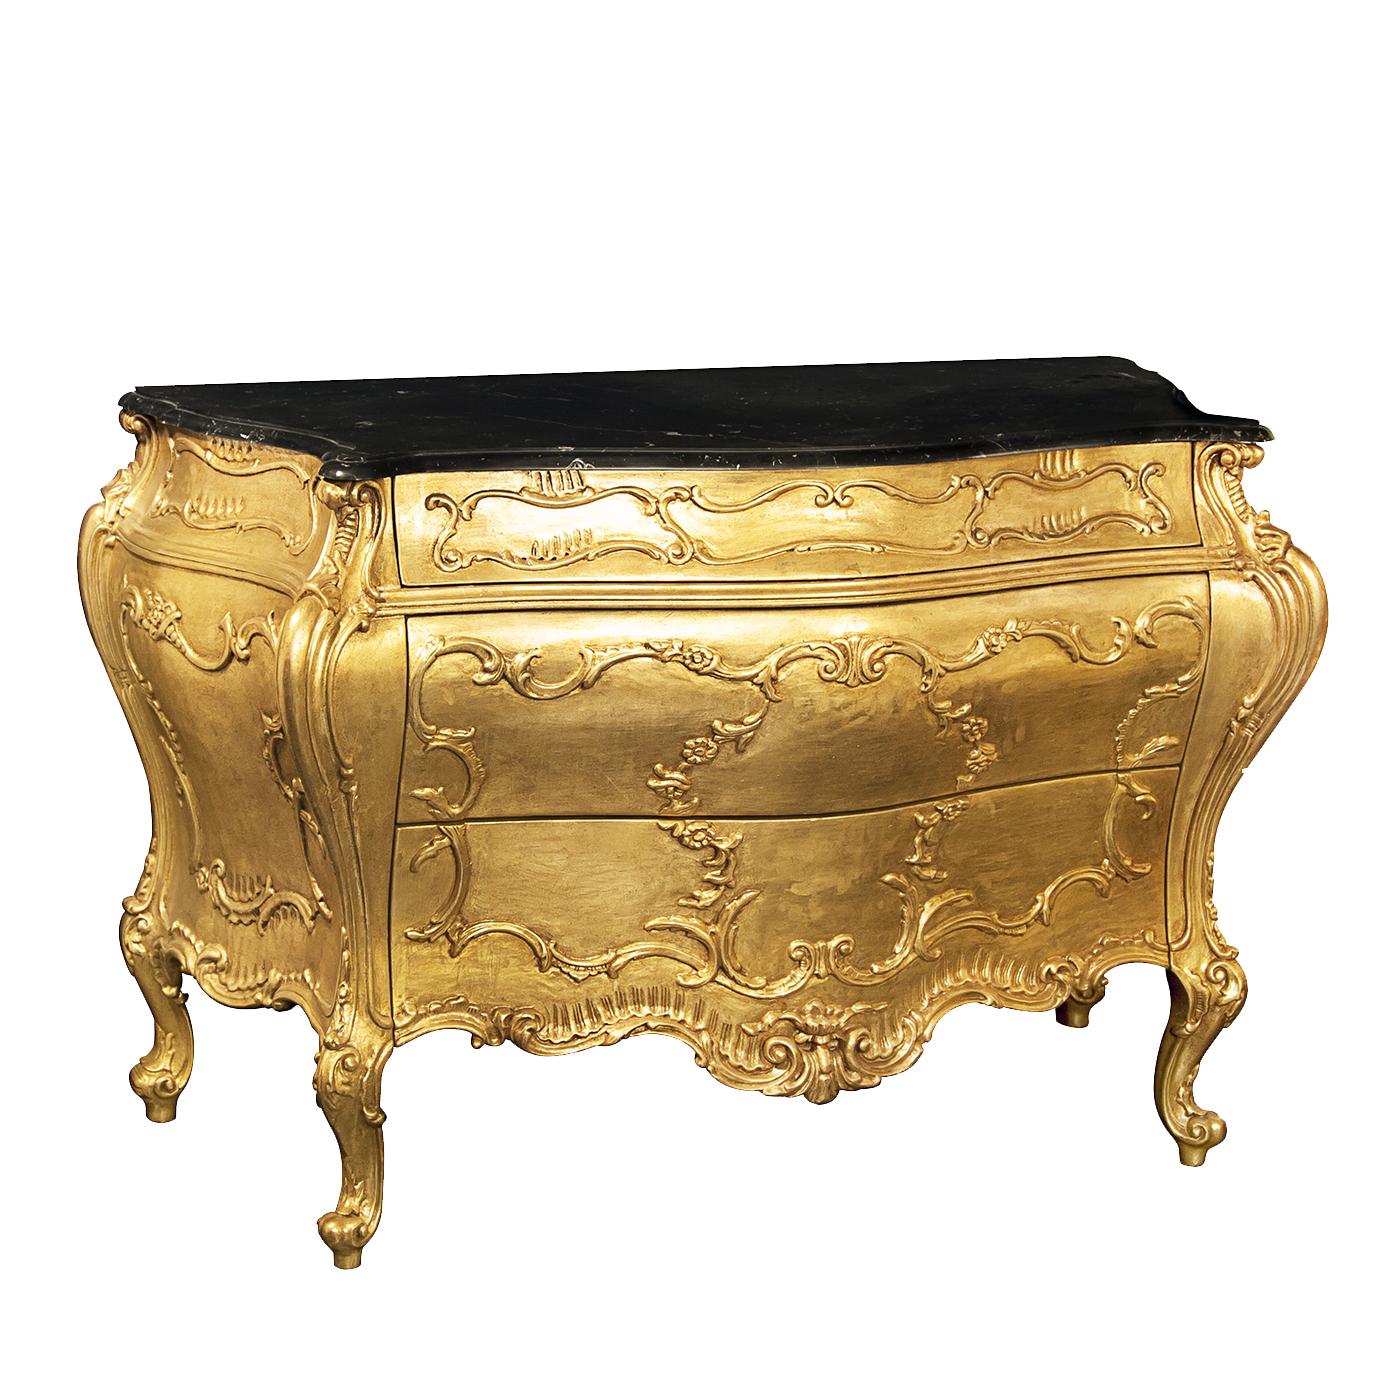 A celebration of traditional craftsmanship and Baroque-inspired style, this chest of drawers is a precious object of functional decor that will enrich the look of a living room, entryway, or bedroom and provide invaluable storage space for everyday